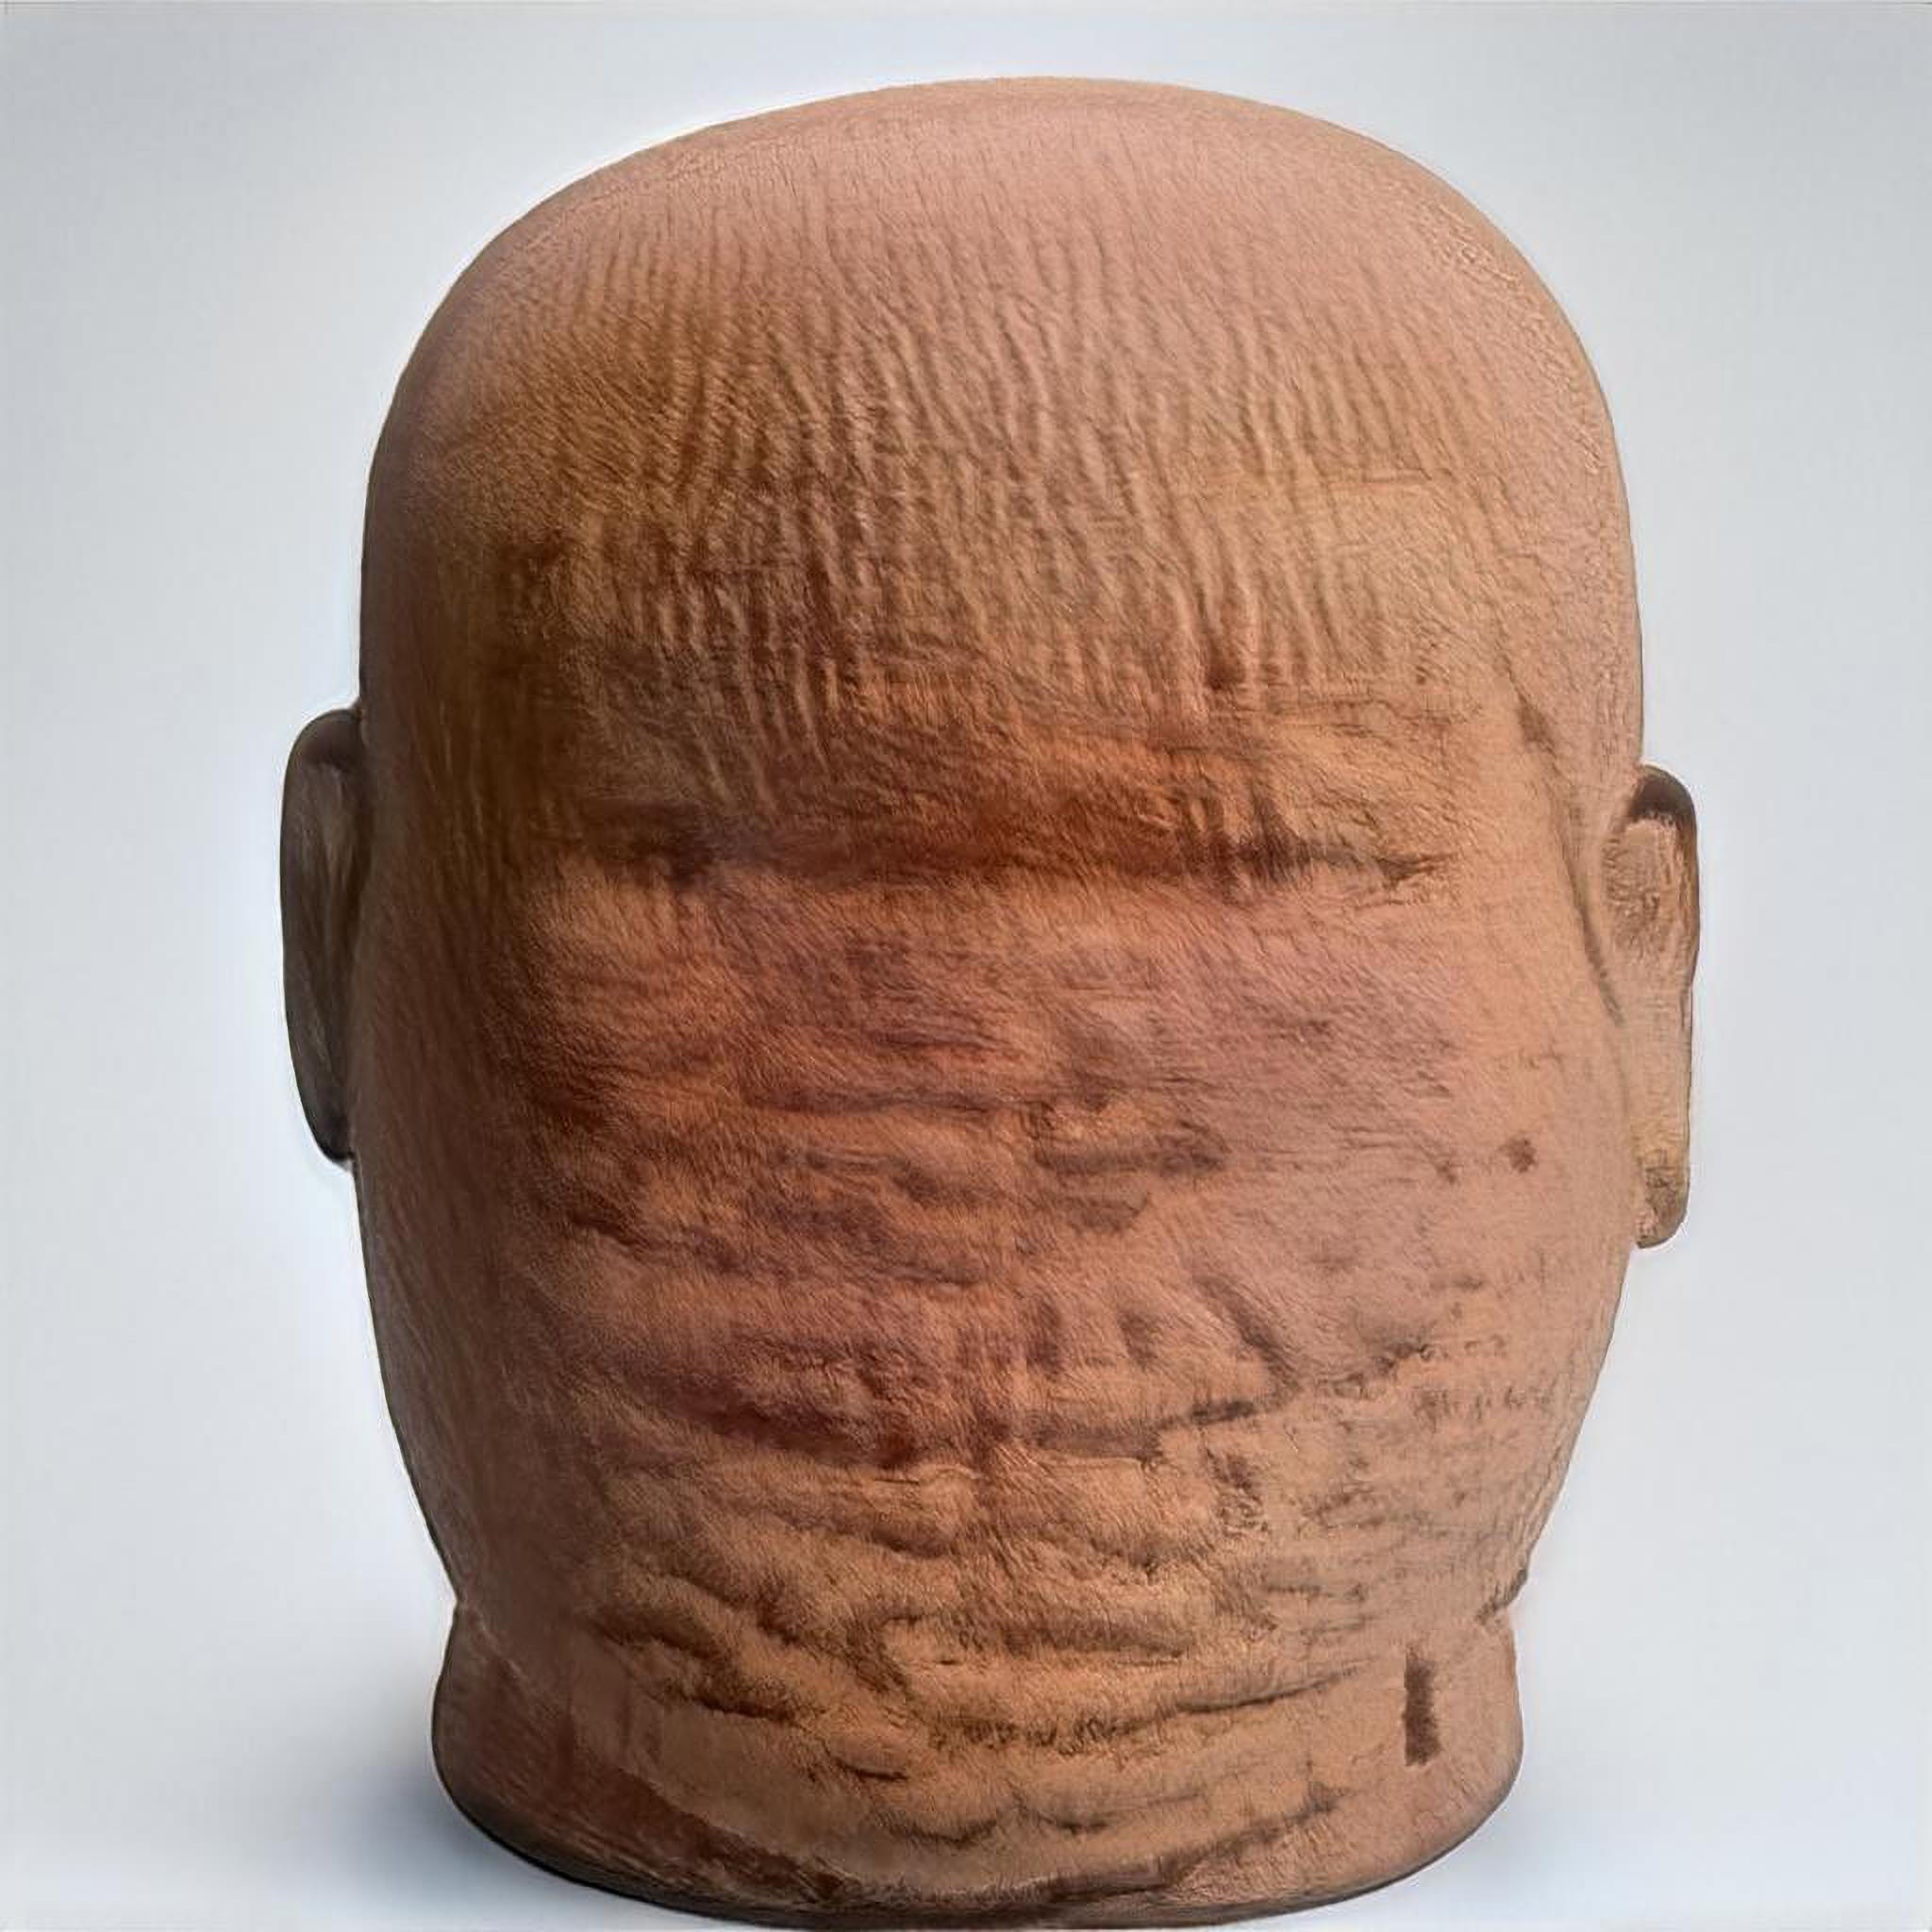 An AI-generated close up view of a weathered terracotta sculpture showing the faint remnants of a brown and ears but no other features.